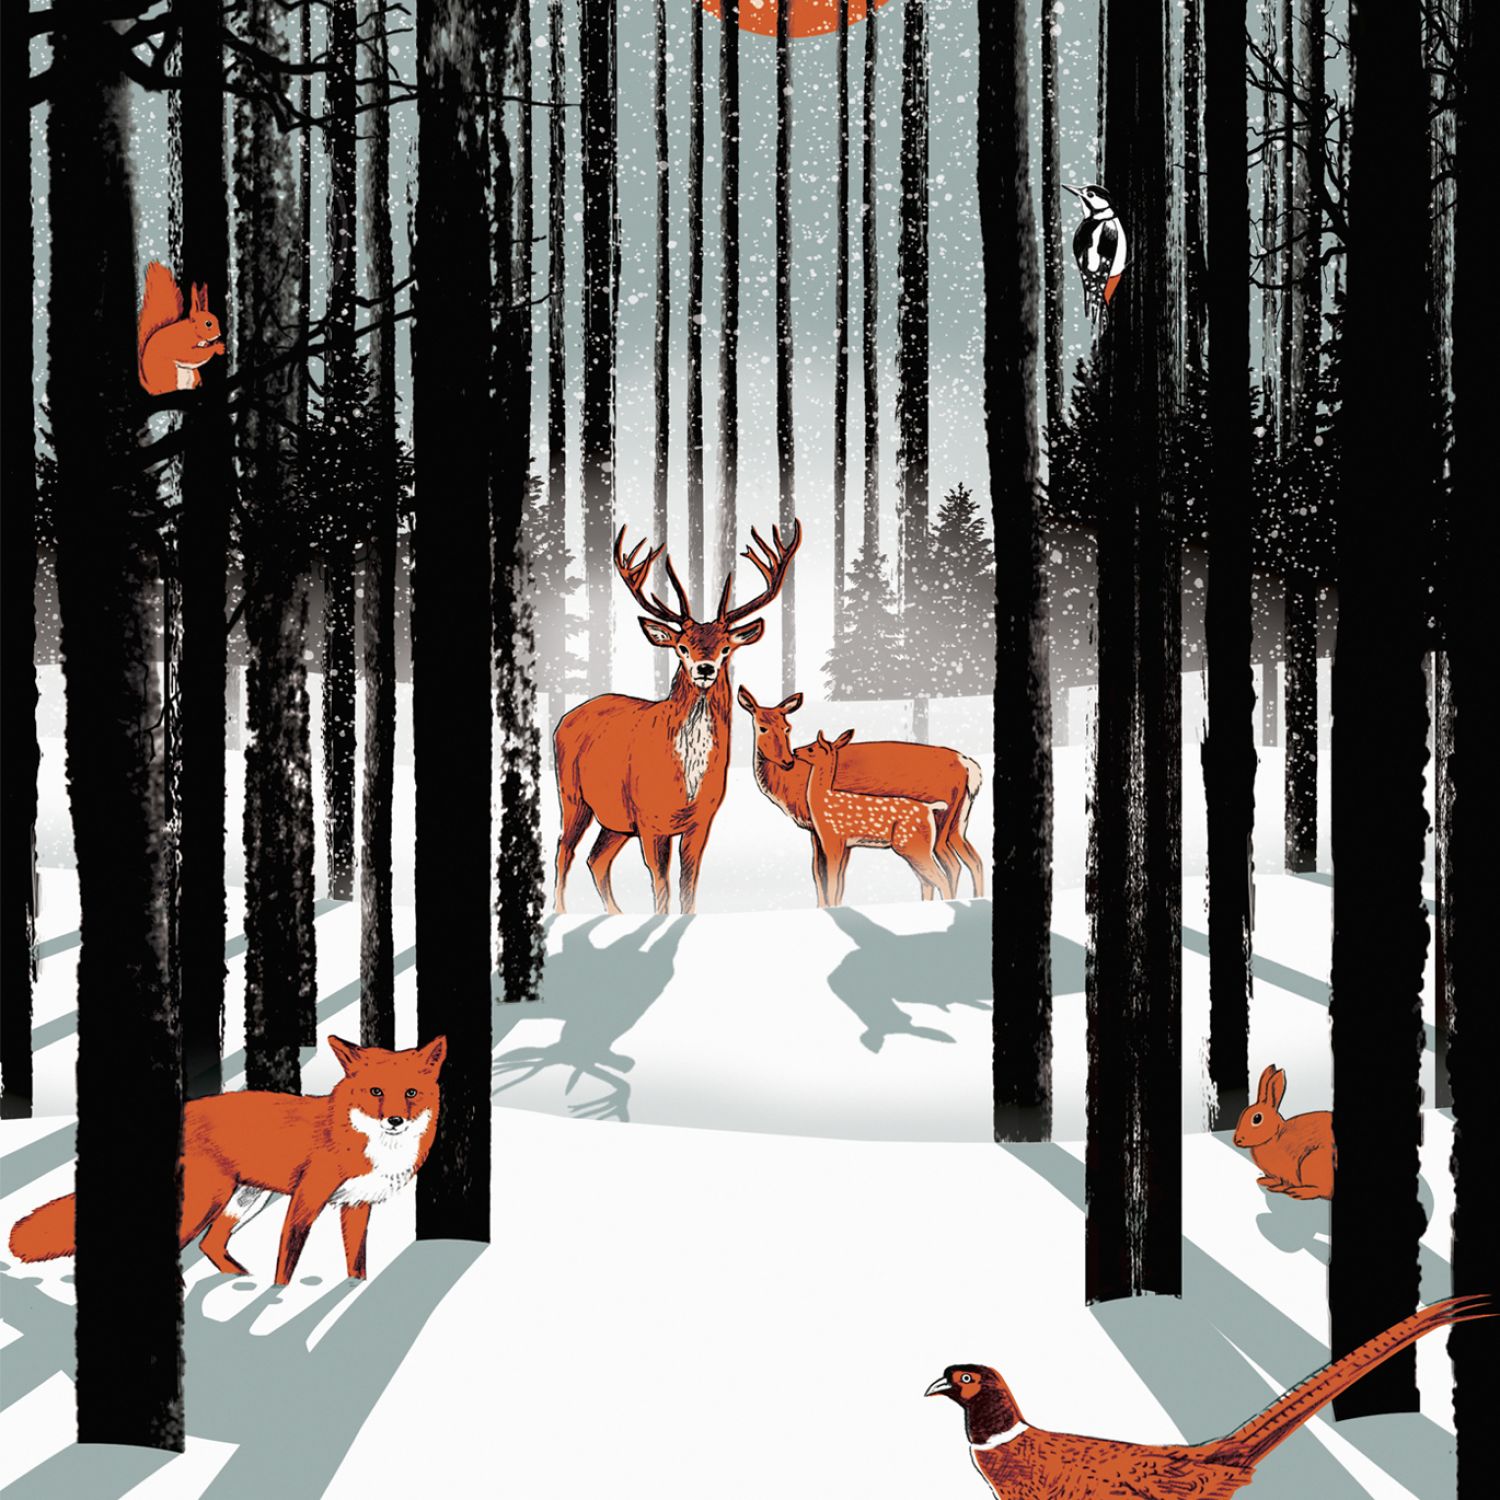 Illustration of animals standing in a snowy winter forest